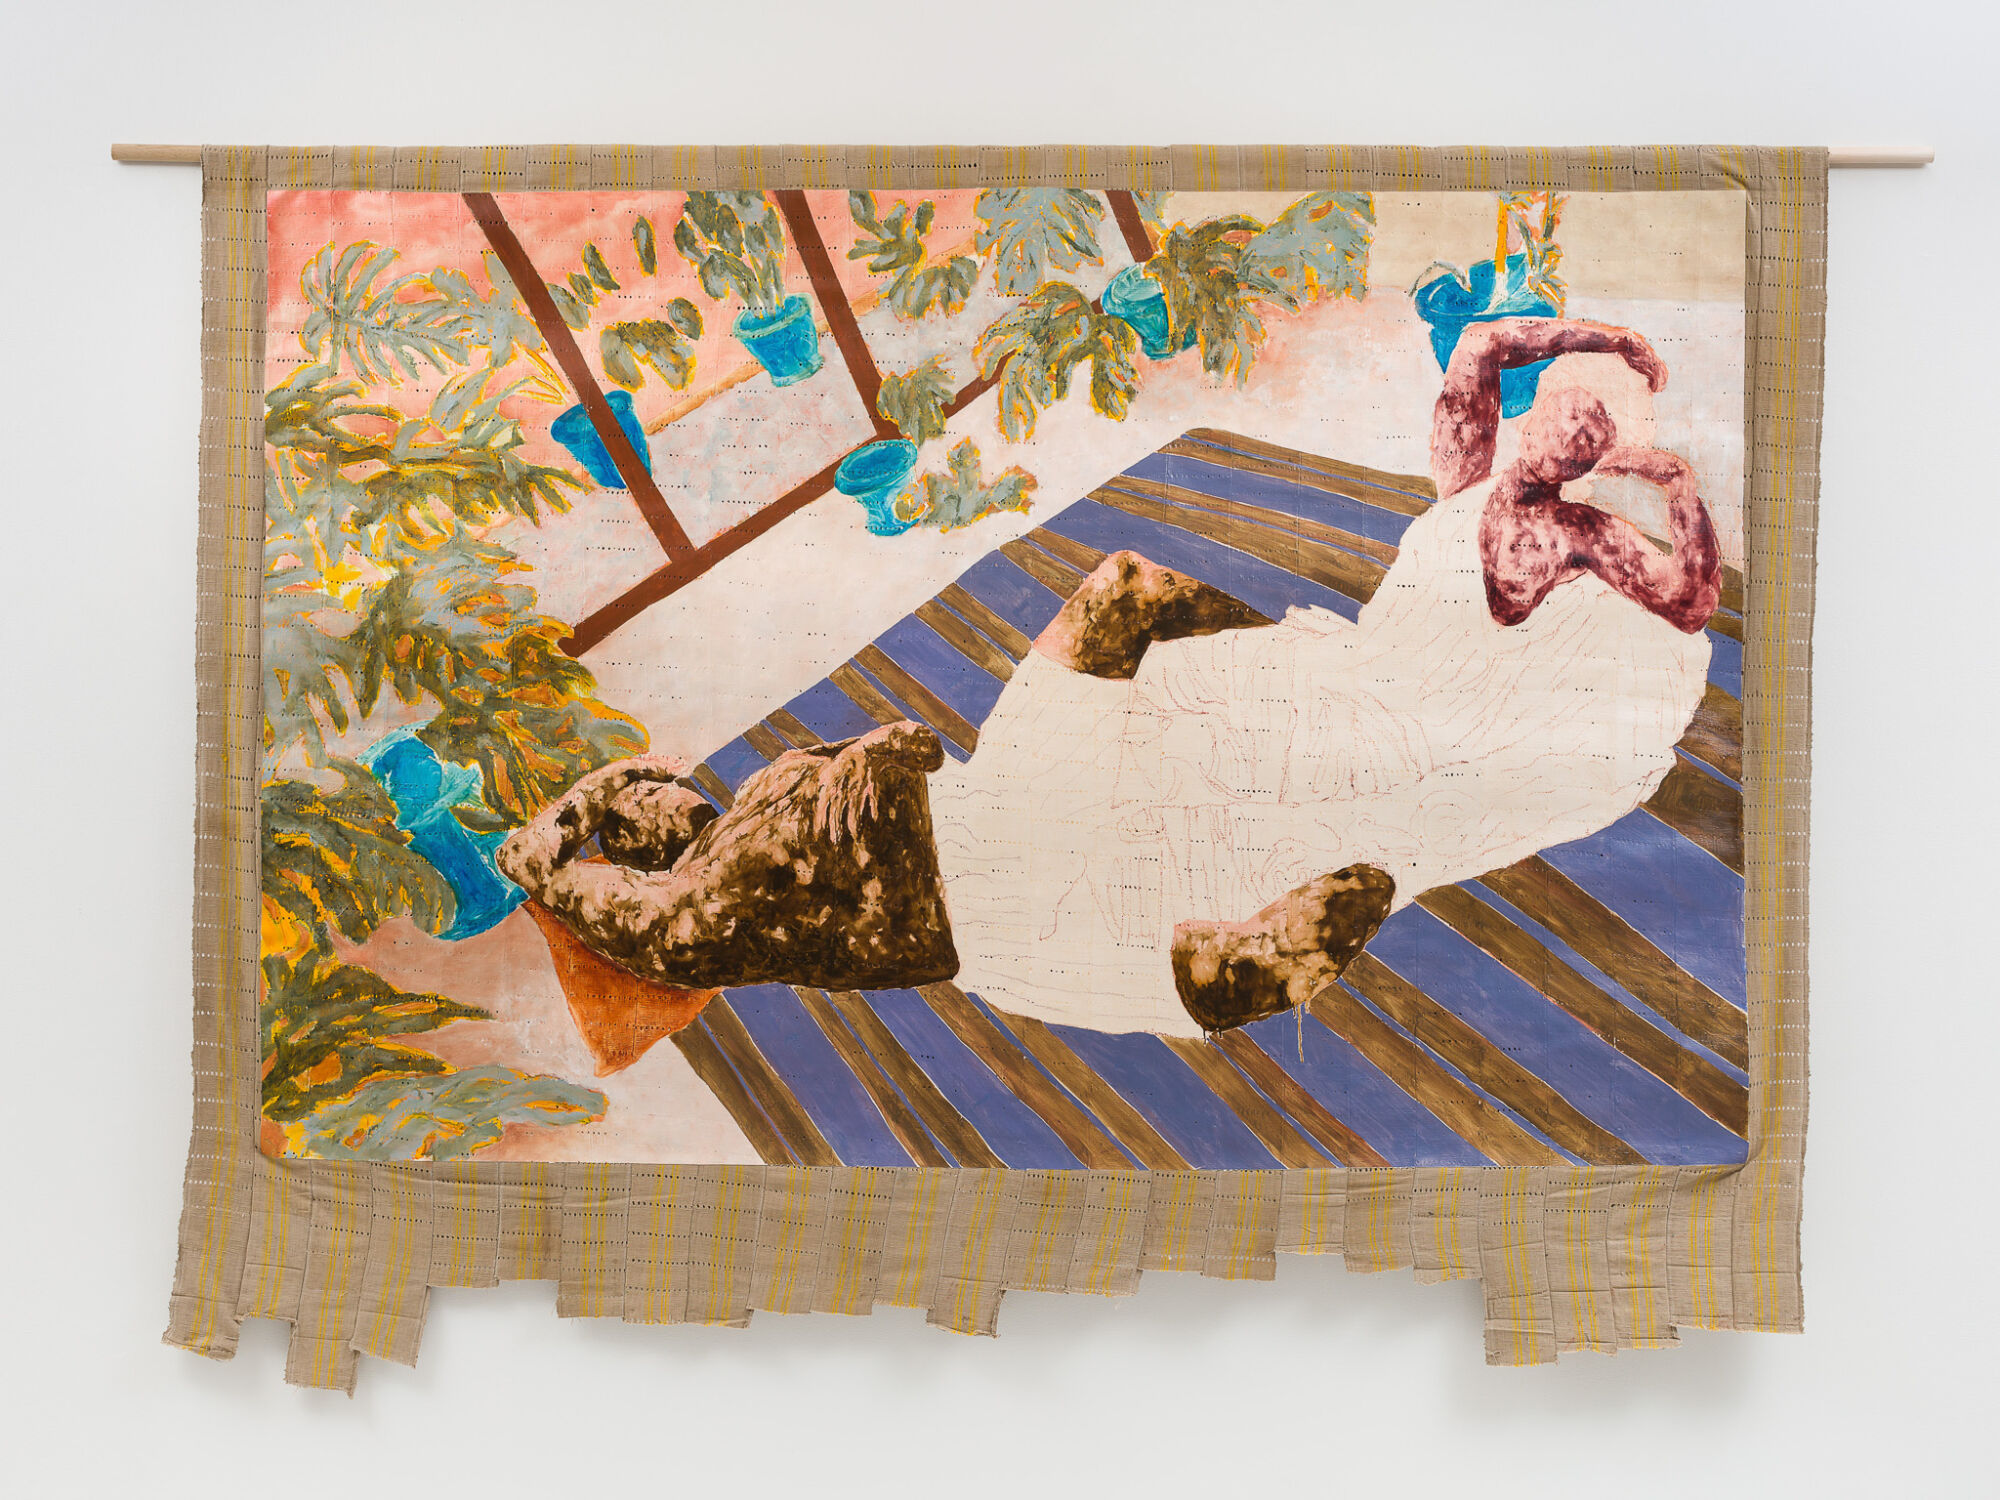 The Wick - Nengi Omuku, Reclining Figures, 2022, oil on sanyan, 193 x 249 cm, 76 x 98 1/8 in, Collection Baltimore Museum of Art, MN, Image courtesy Pippy Houldsworth Gallery, London, Photo: Mark Blower, © Nengi Omuku